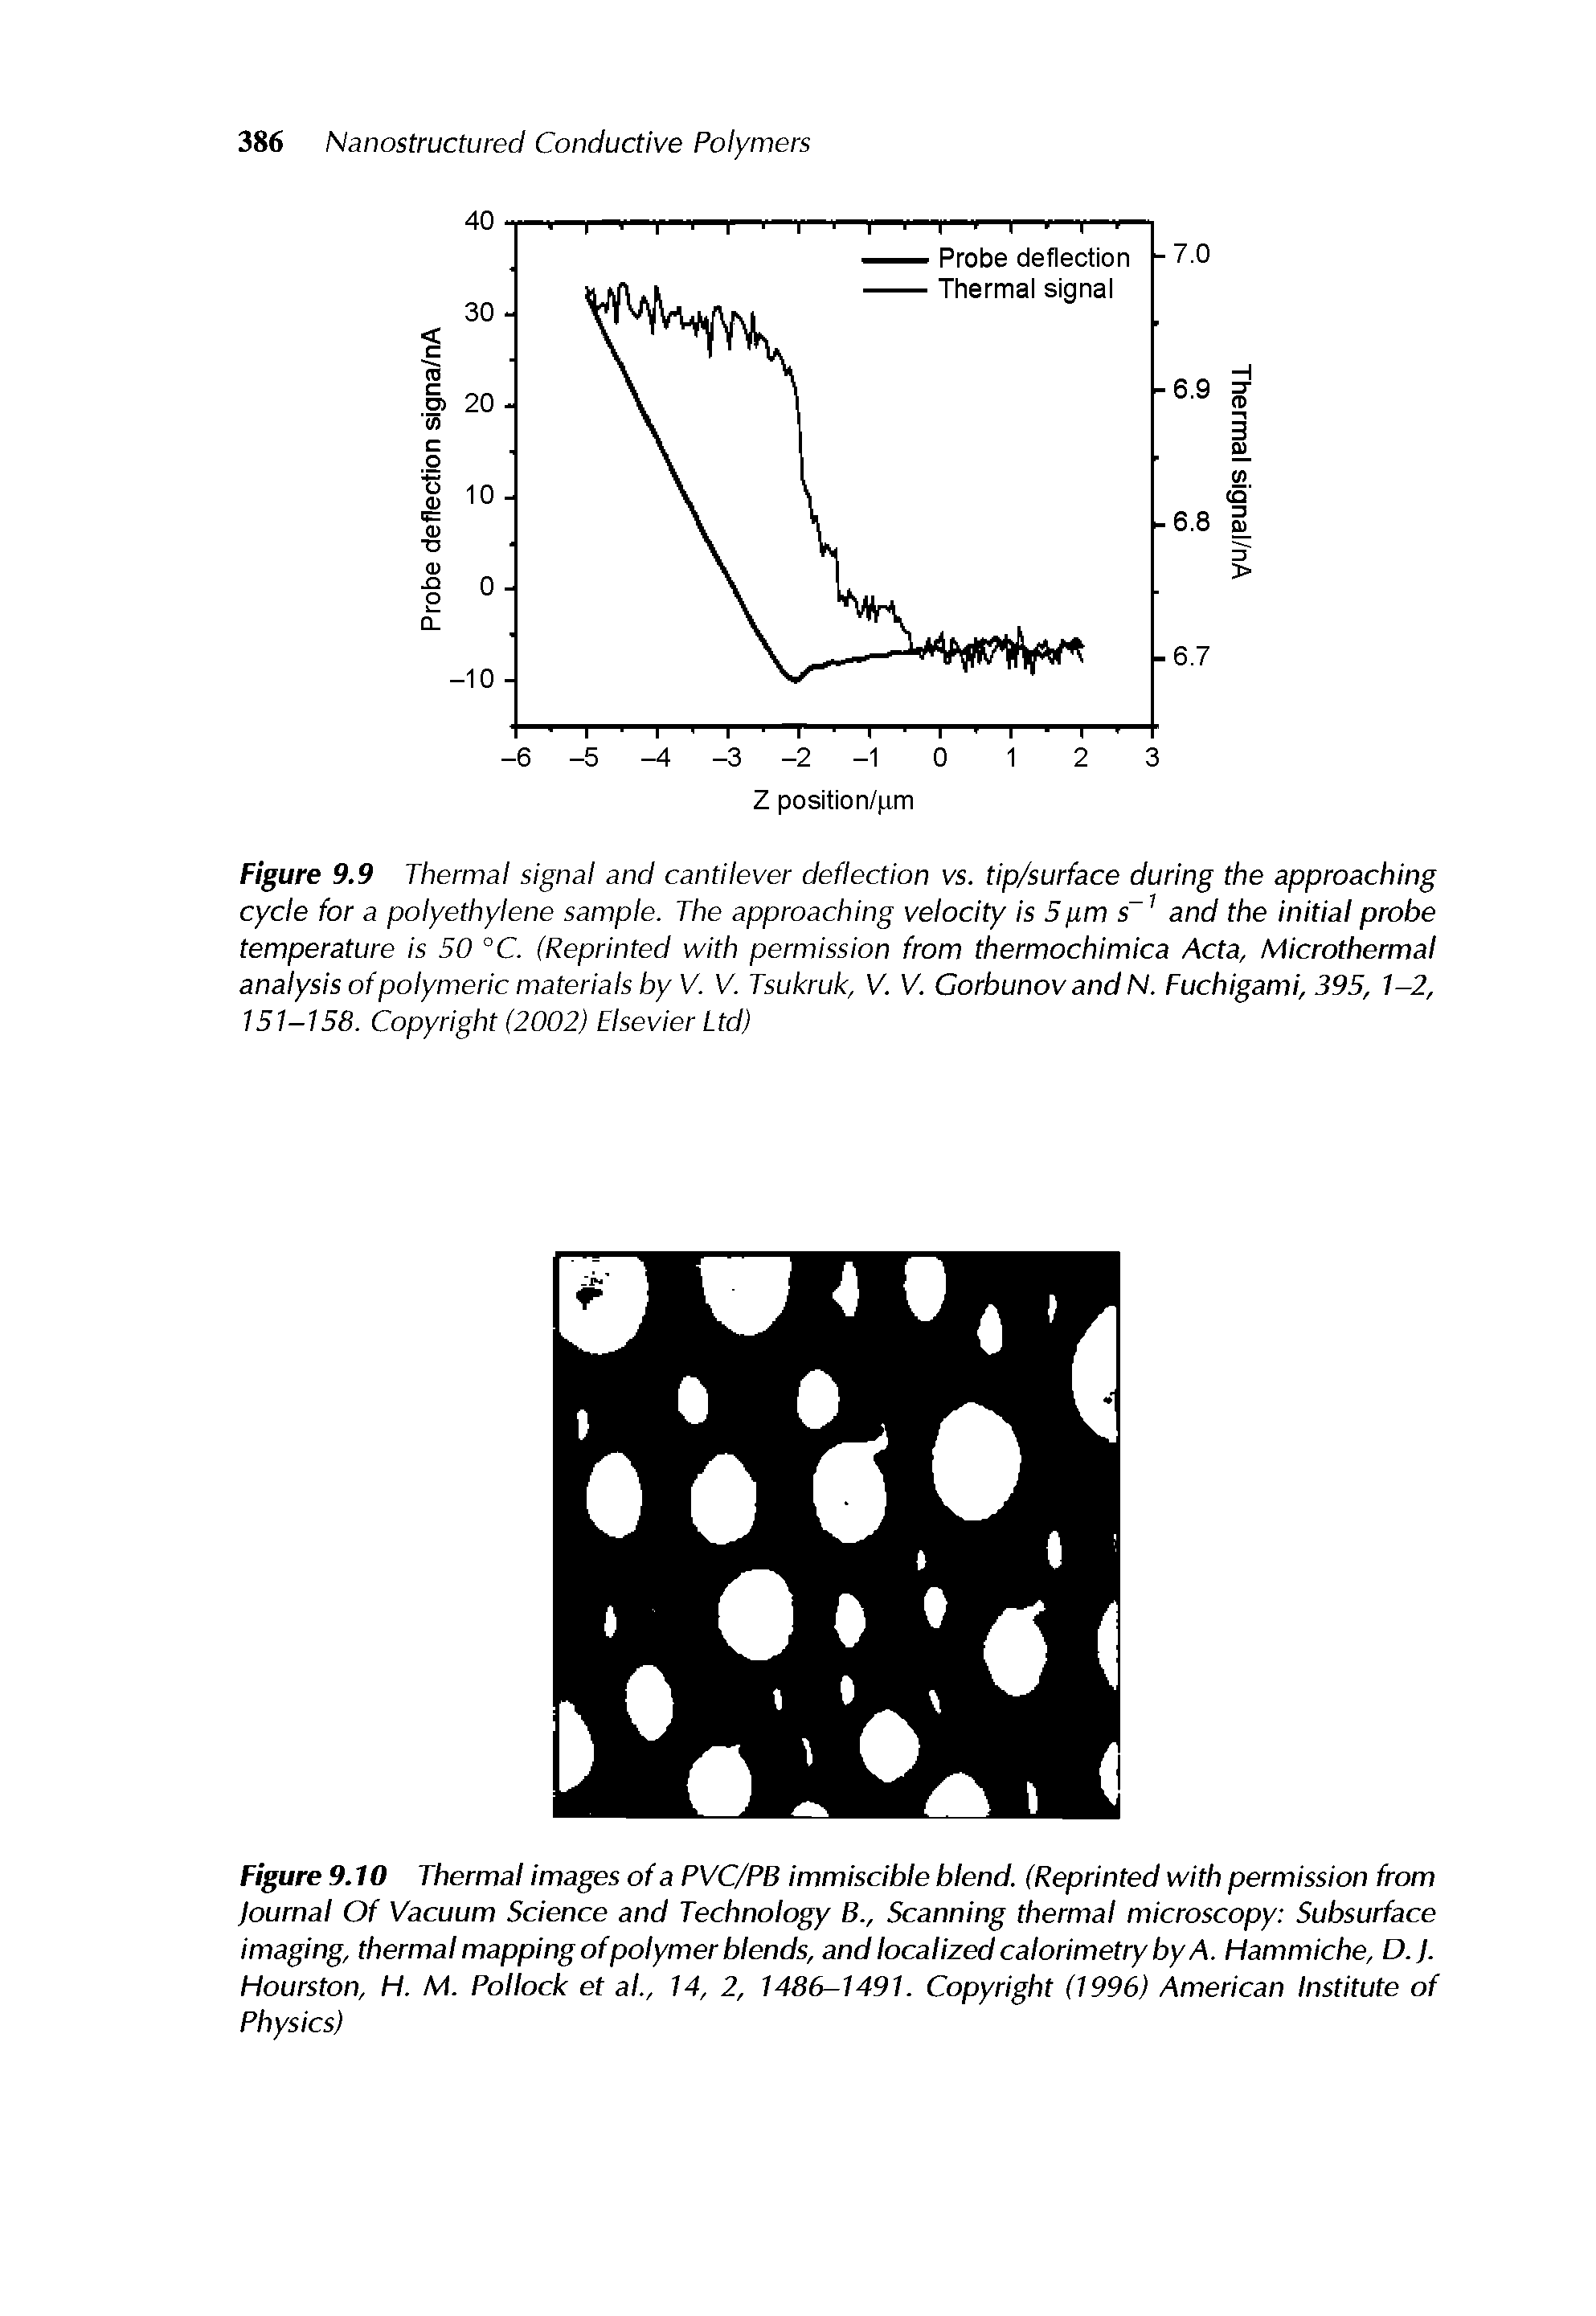 Figure 9.9 Thermal signal and cantilever deflection vs. tip/surface during the approaching cycle for a polyethylene sample. The approaching velocity is 5pm s and the initial probe temperature is 50 °C. (Reprinted with permission from thermochimica Acta, Microthermal analysis of polymeric materials by V. V. Tsukruk, K K Gorbunov and N. Fuchigami, 395, 1-2, 151-158. Copyright (2002) Elsevier Ltd)...